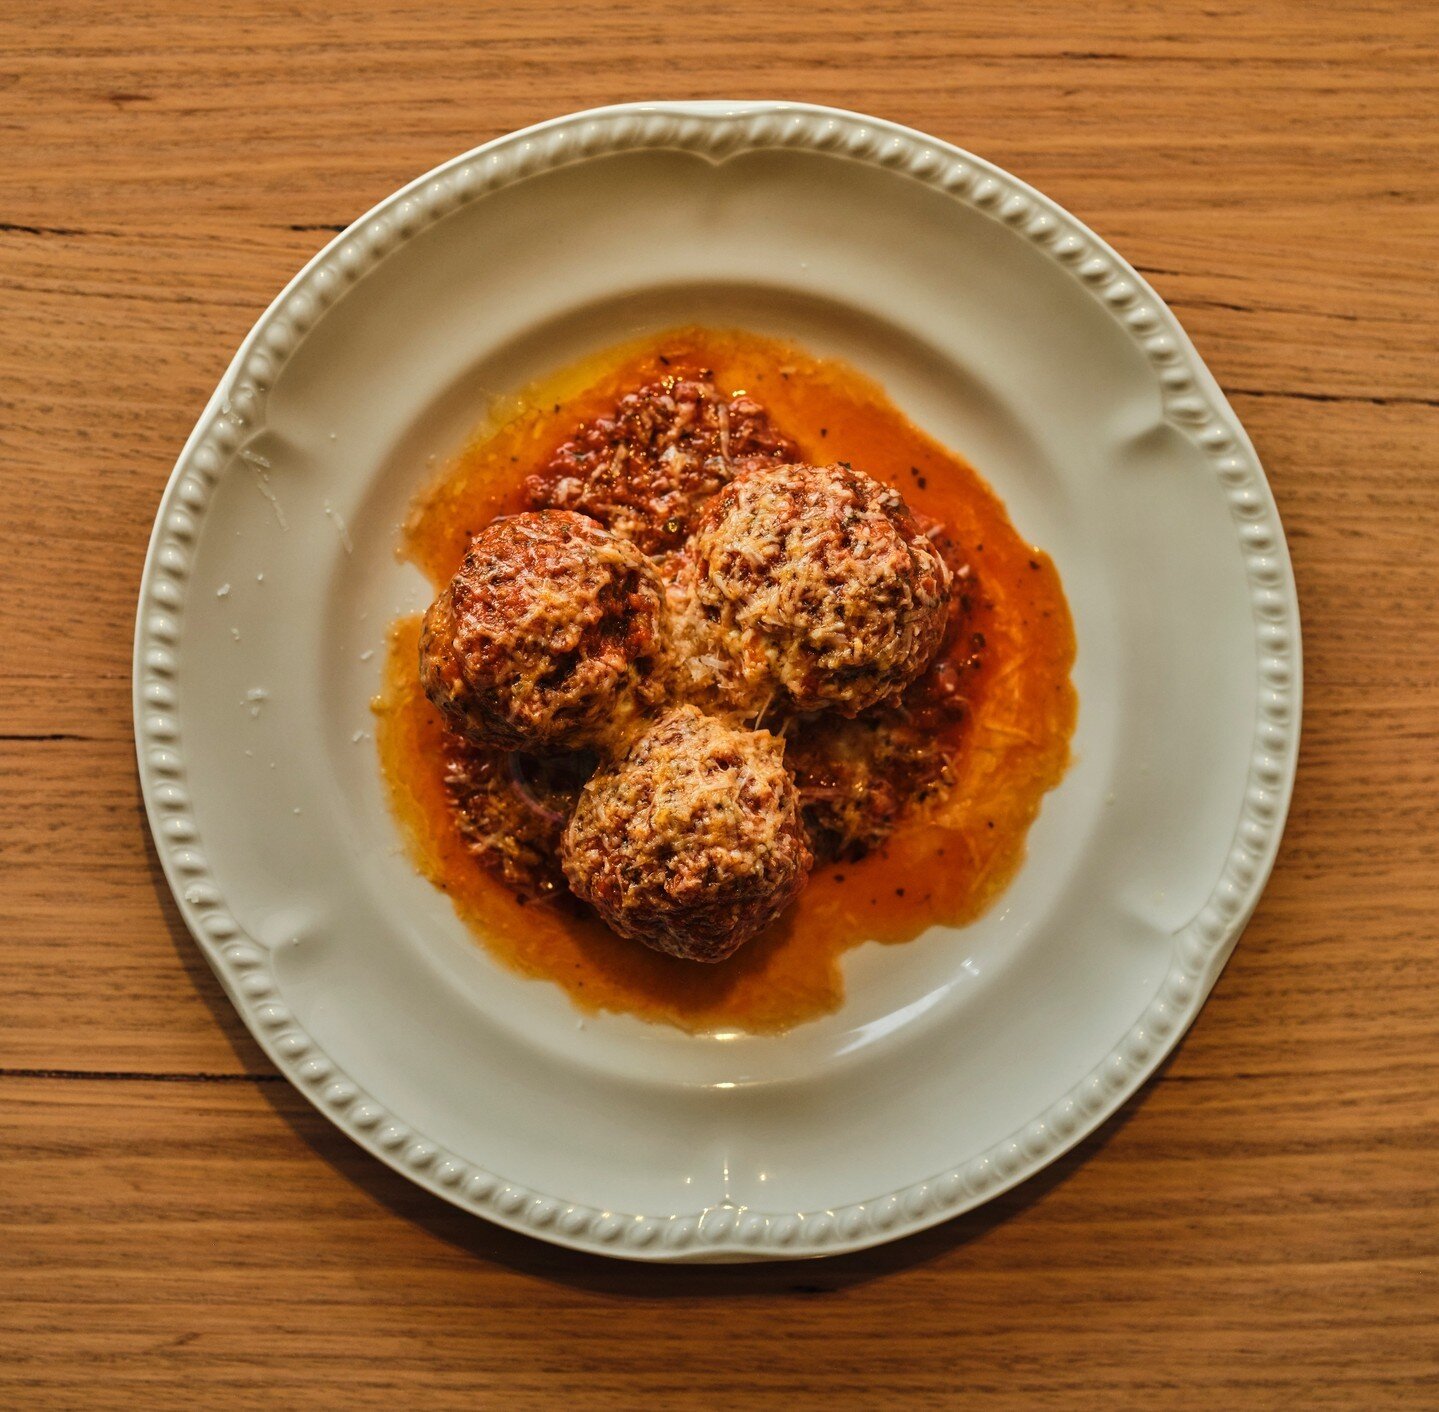 If you're of the belief that meatballs will improve the working week...then you'd be right!